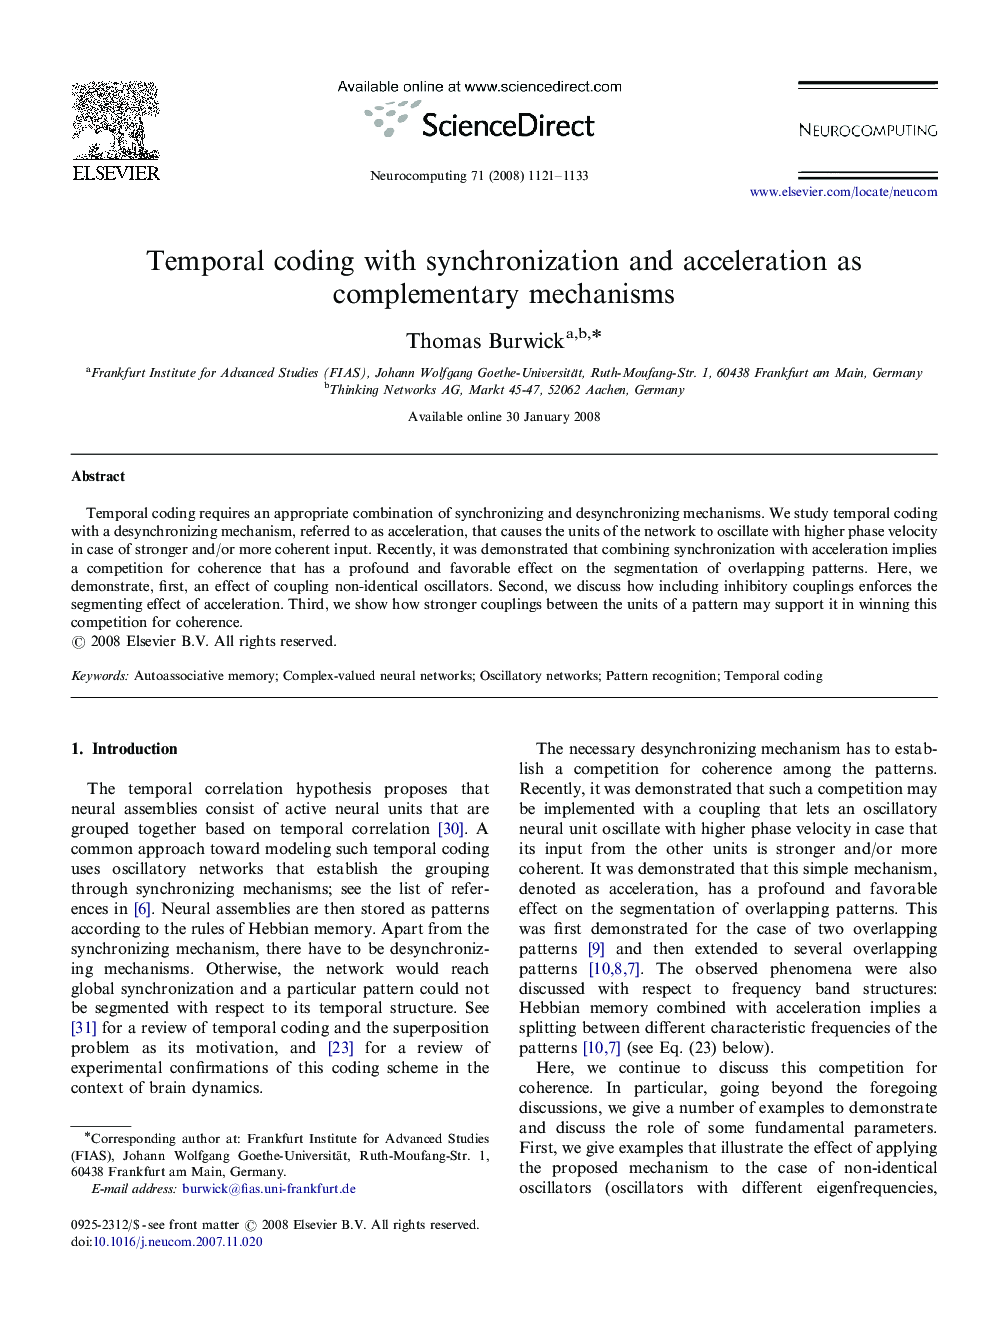 Temporal coding with synchronization and acceleration as complementary mechanisms